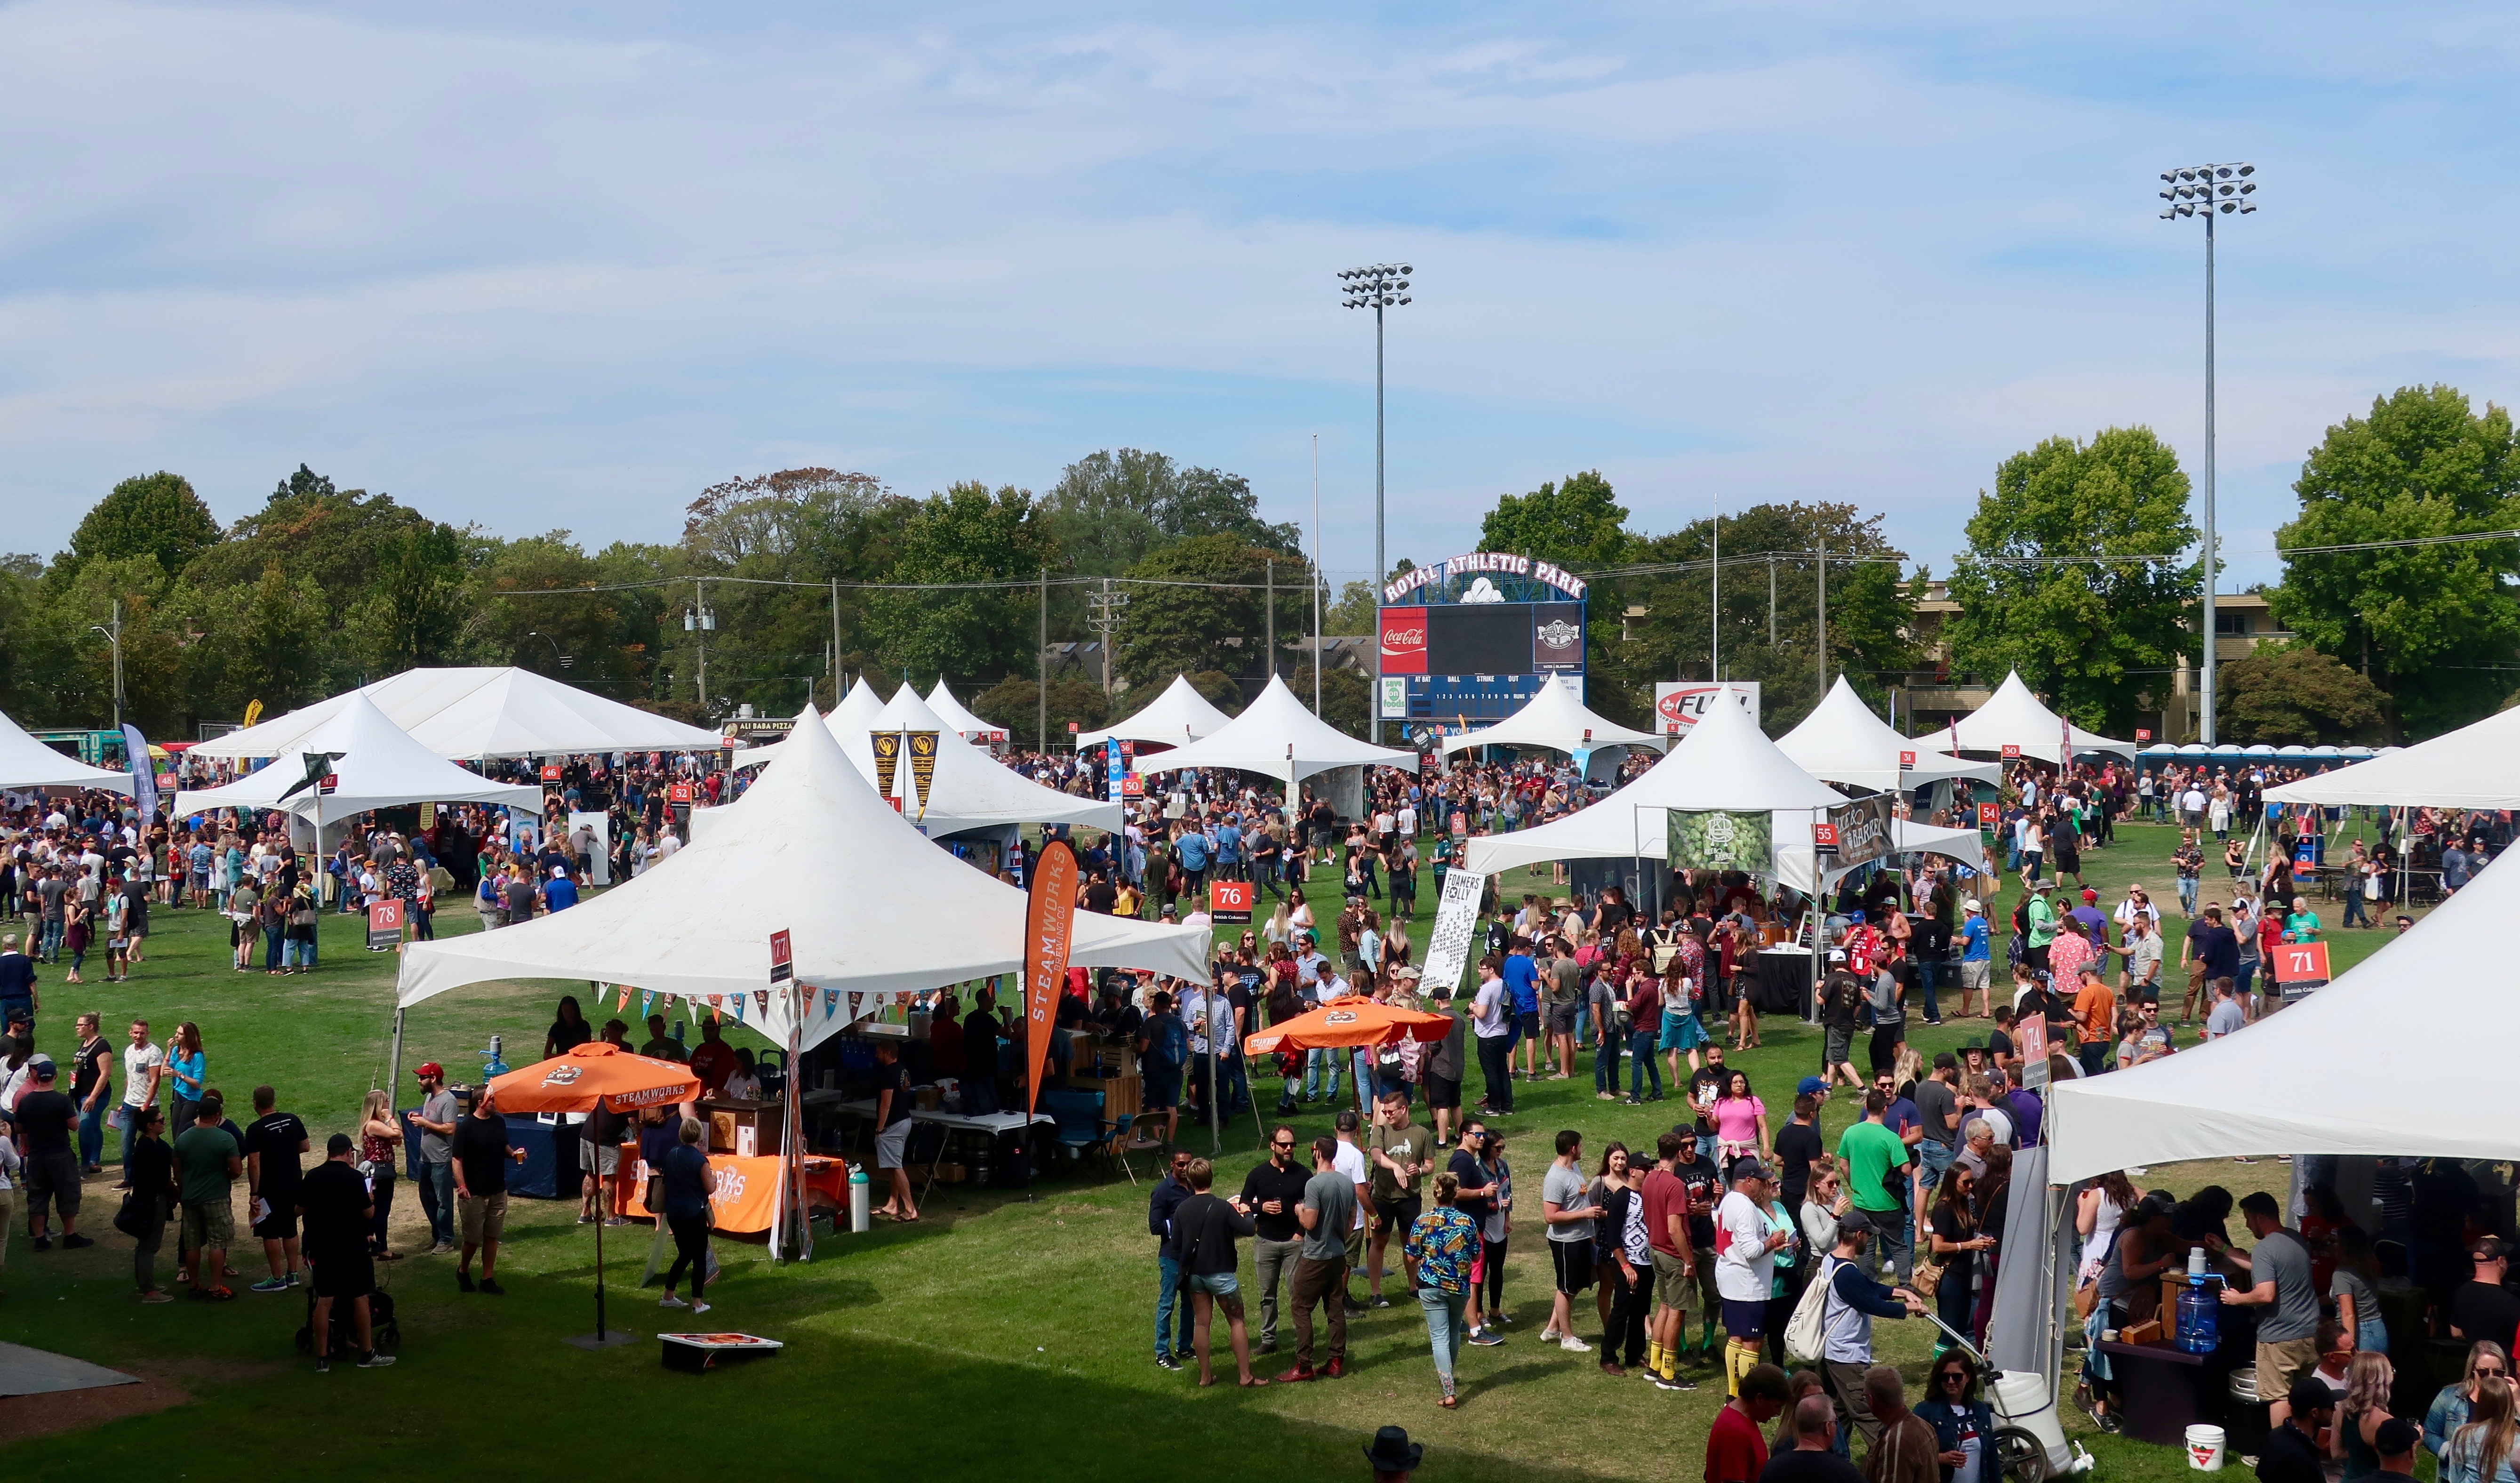 The 2019 Great Canadian Beer Festival took over Royal Athletic Park in Victoria, BC.